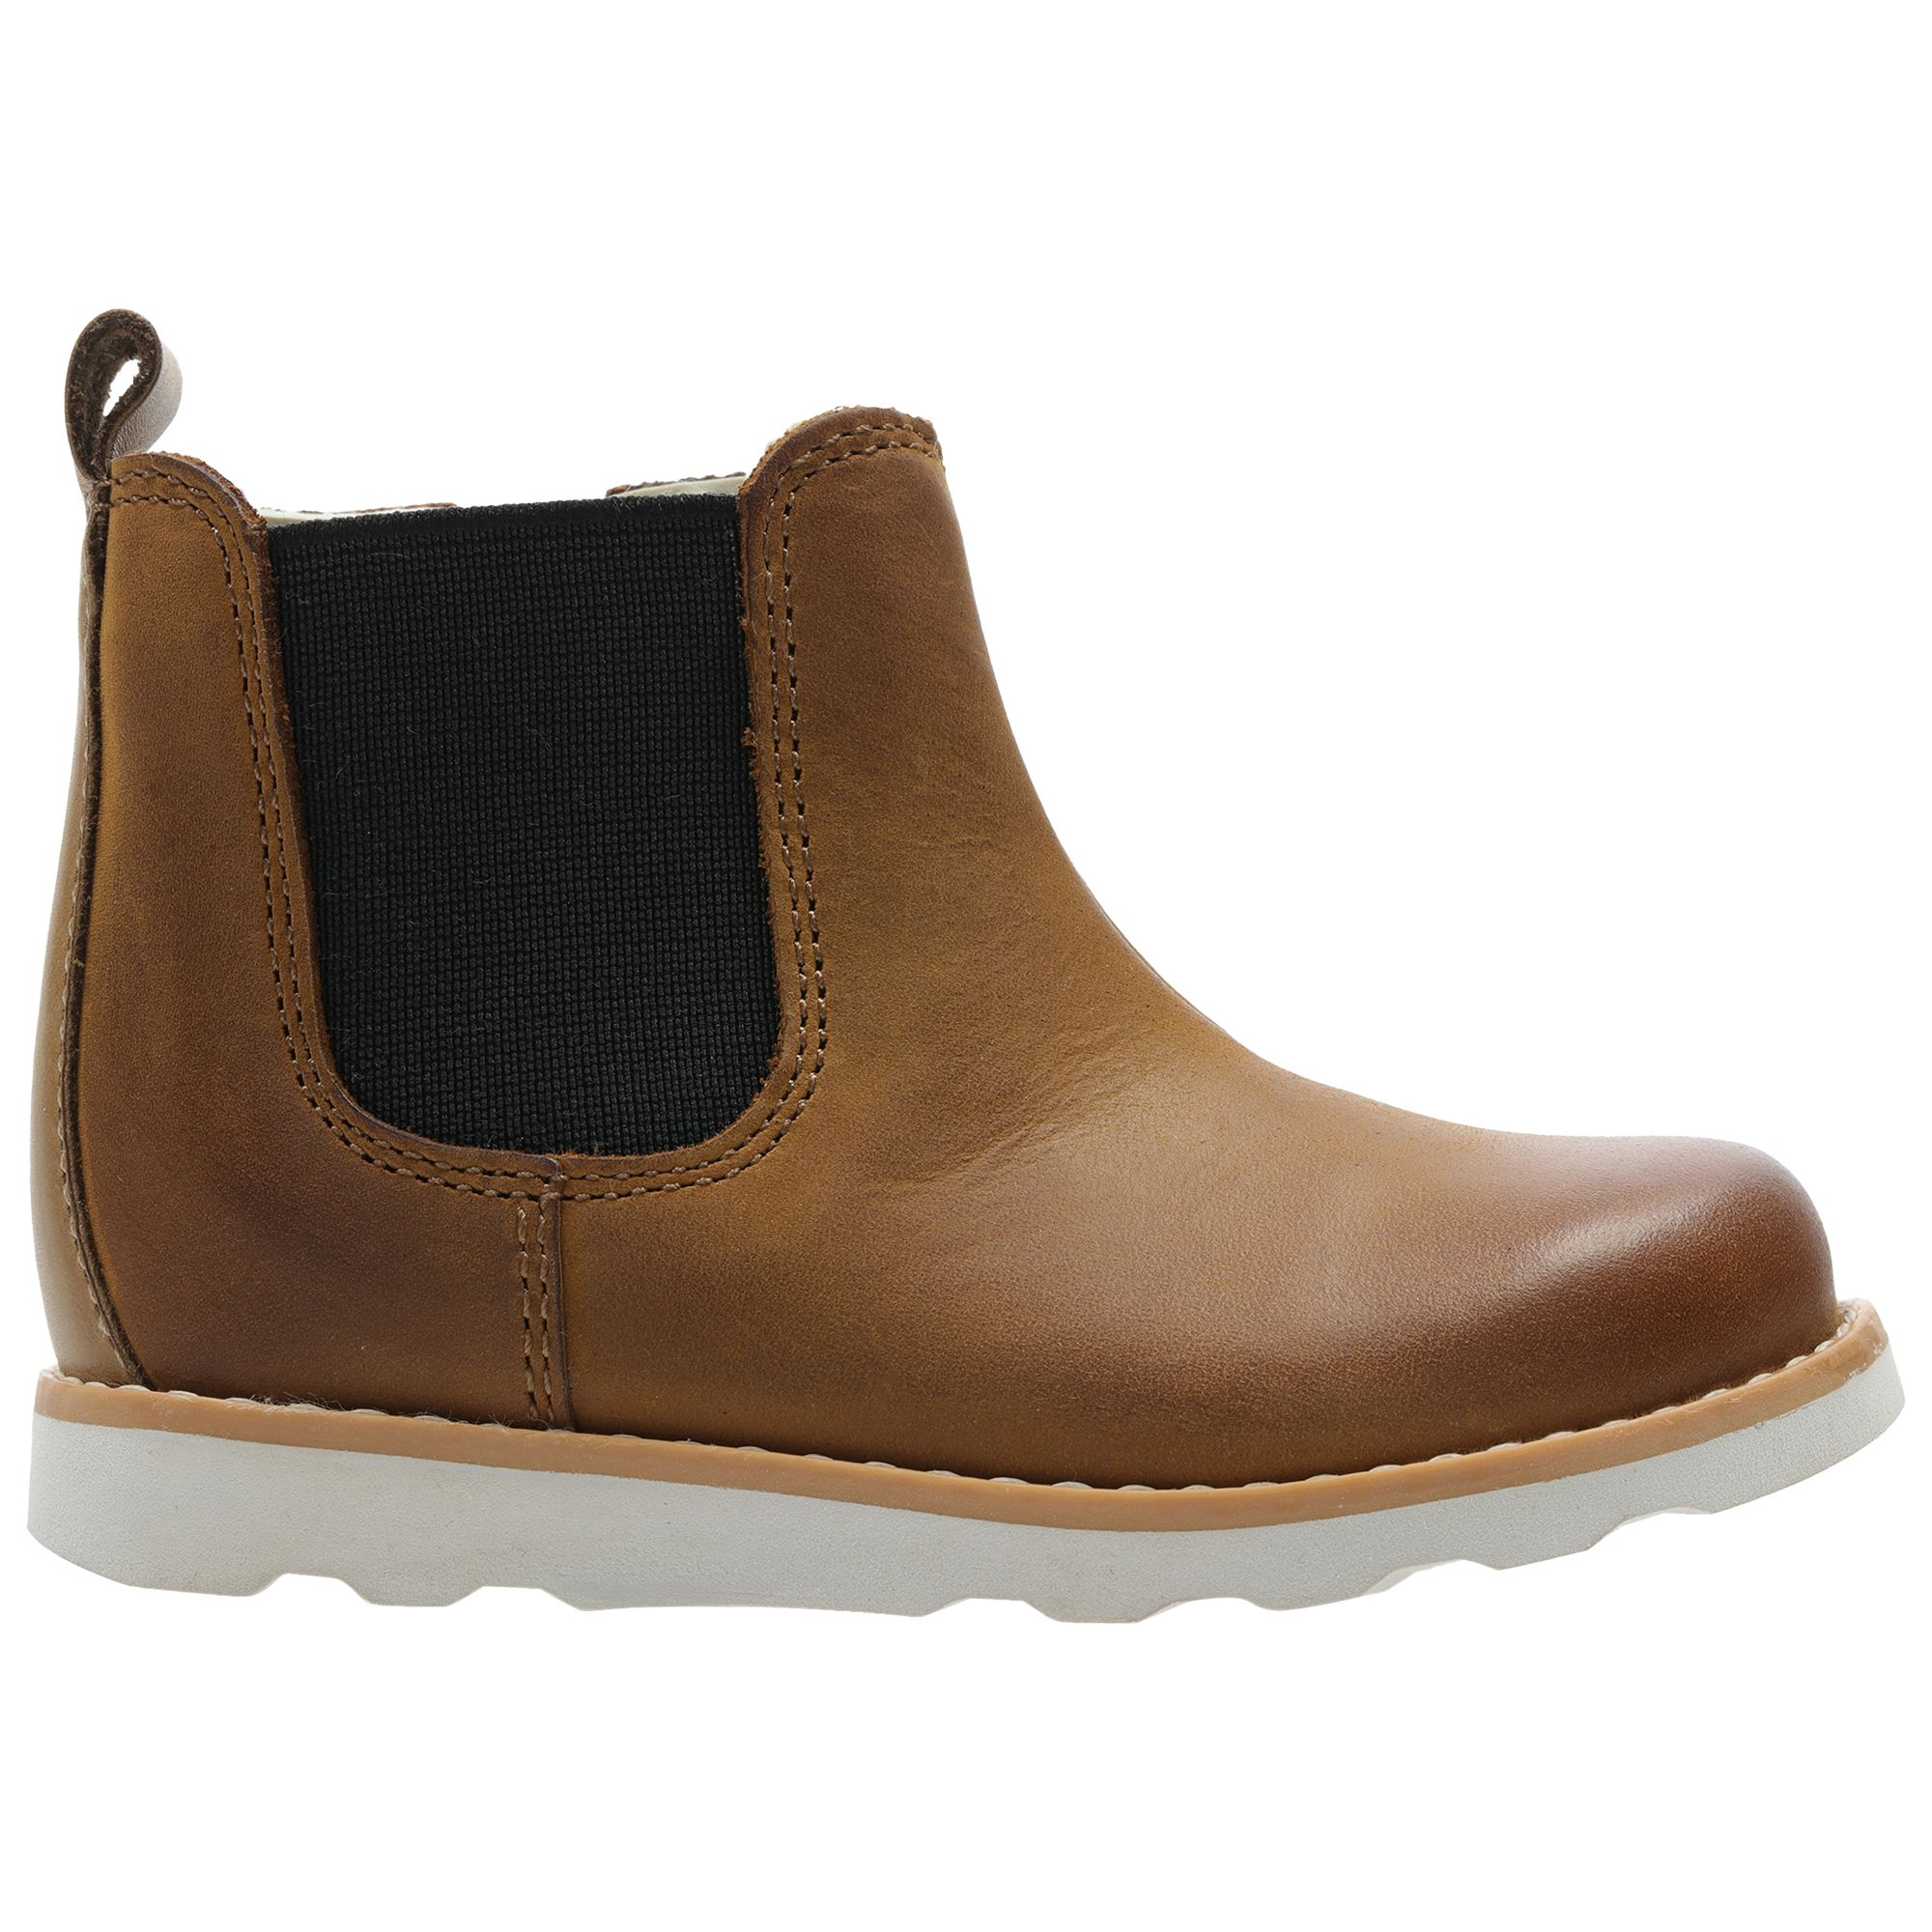 clarks boots 6f